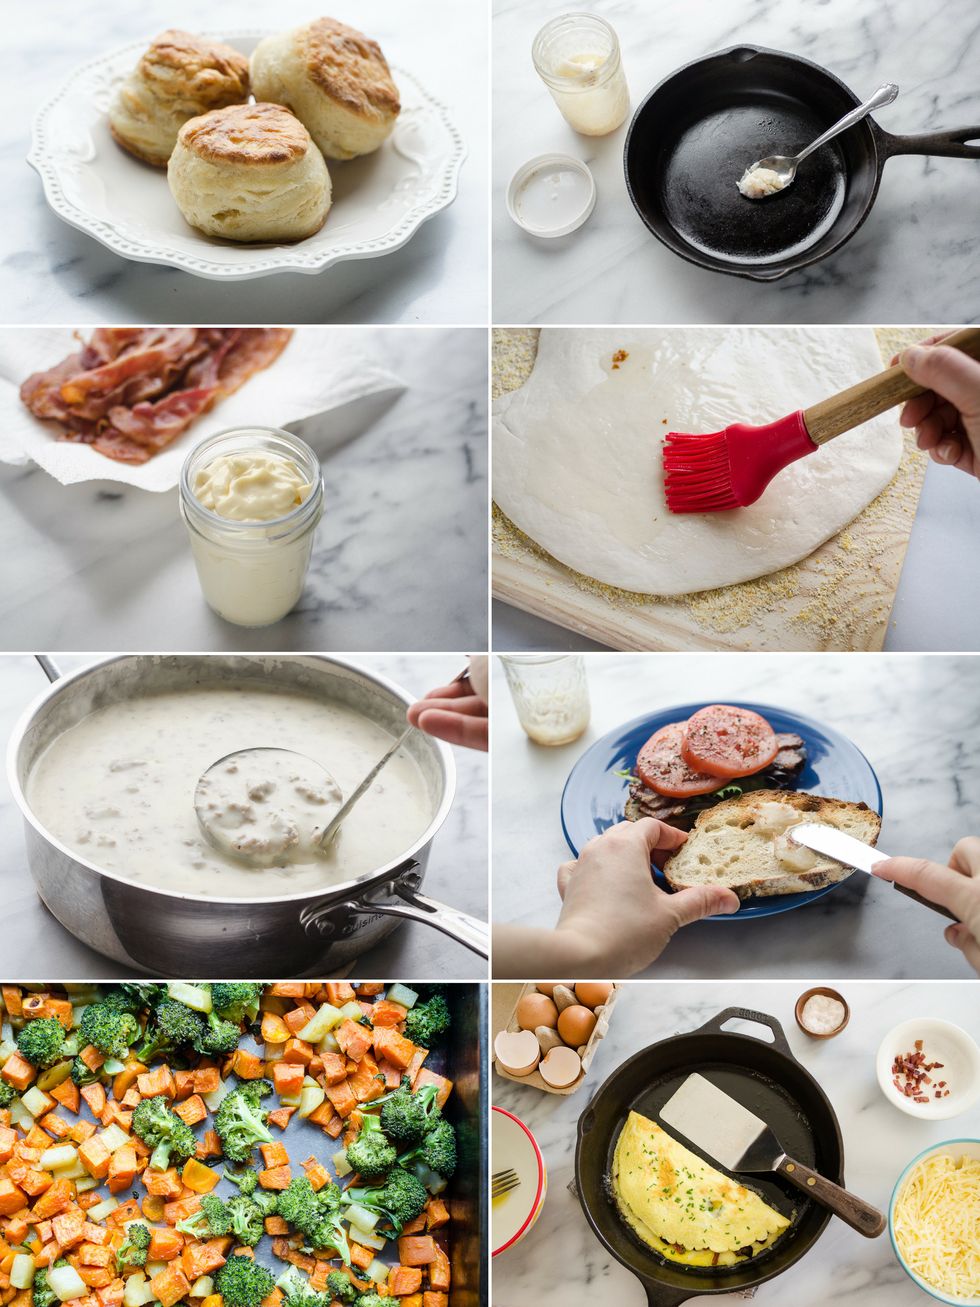 https://hips.hearstapps.com/thepioneerwoman/wp-content/uploads/2019/03/20-Ways-to-Use-Up-Bacon-Grease-17.jpg?resize=980:*